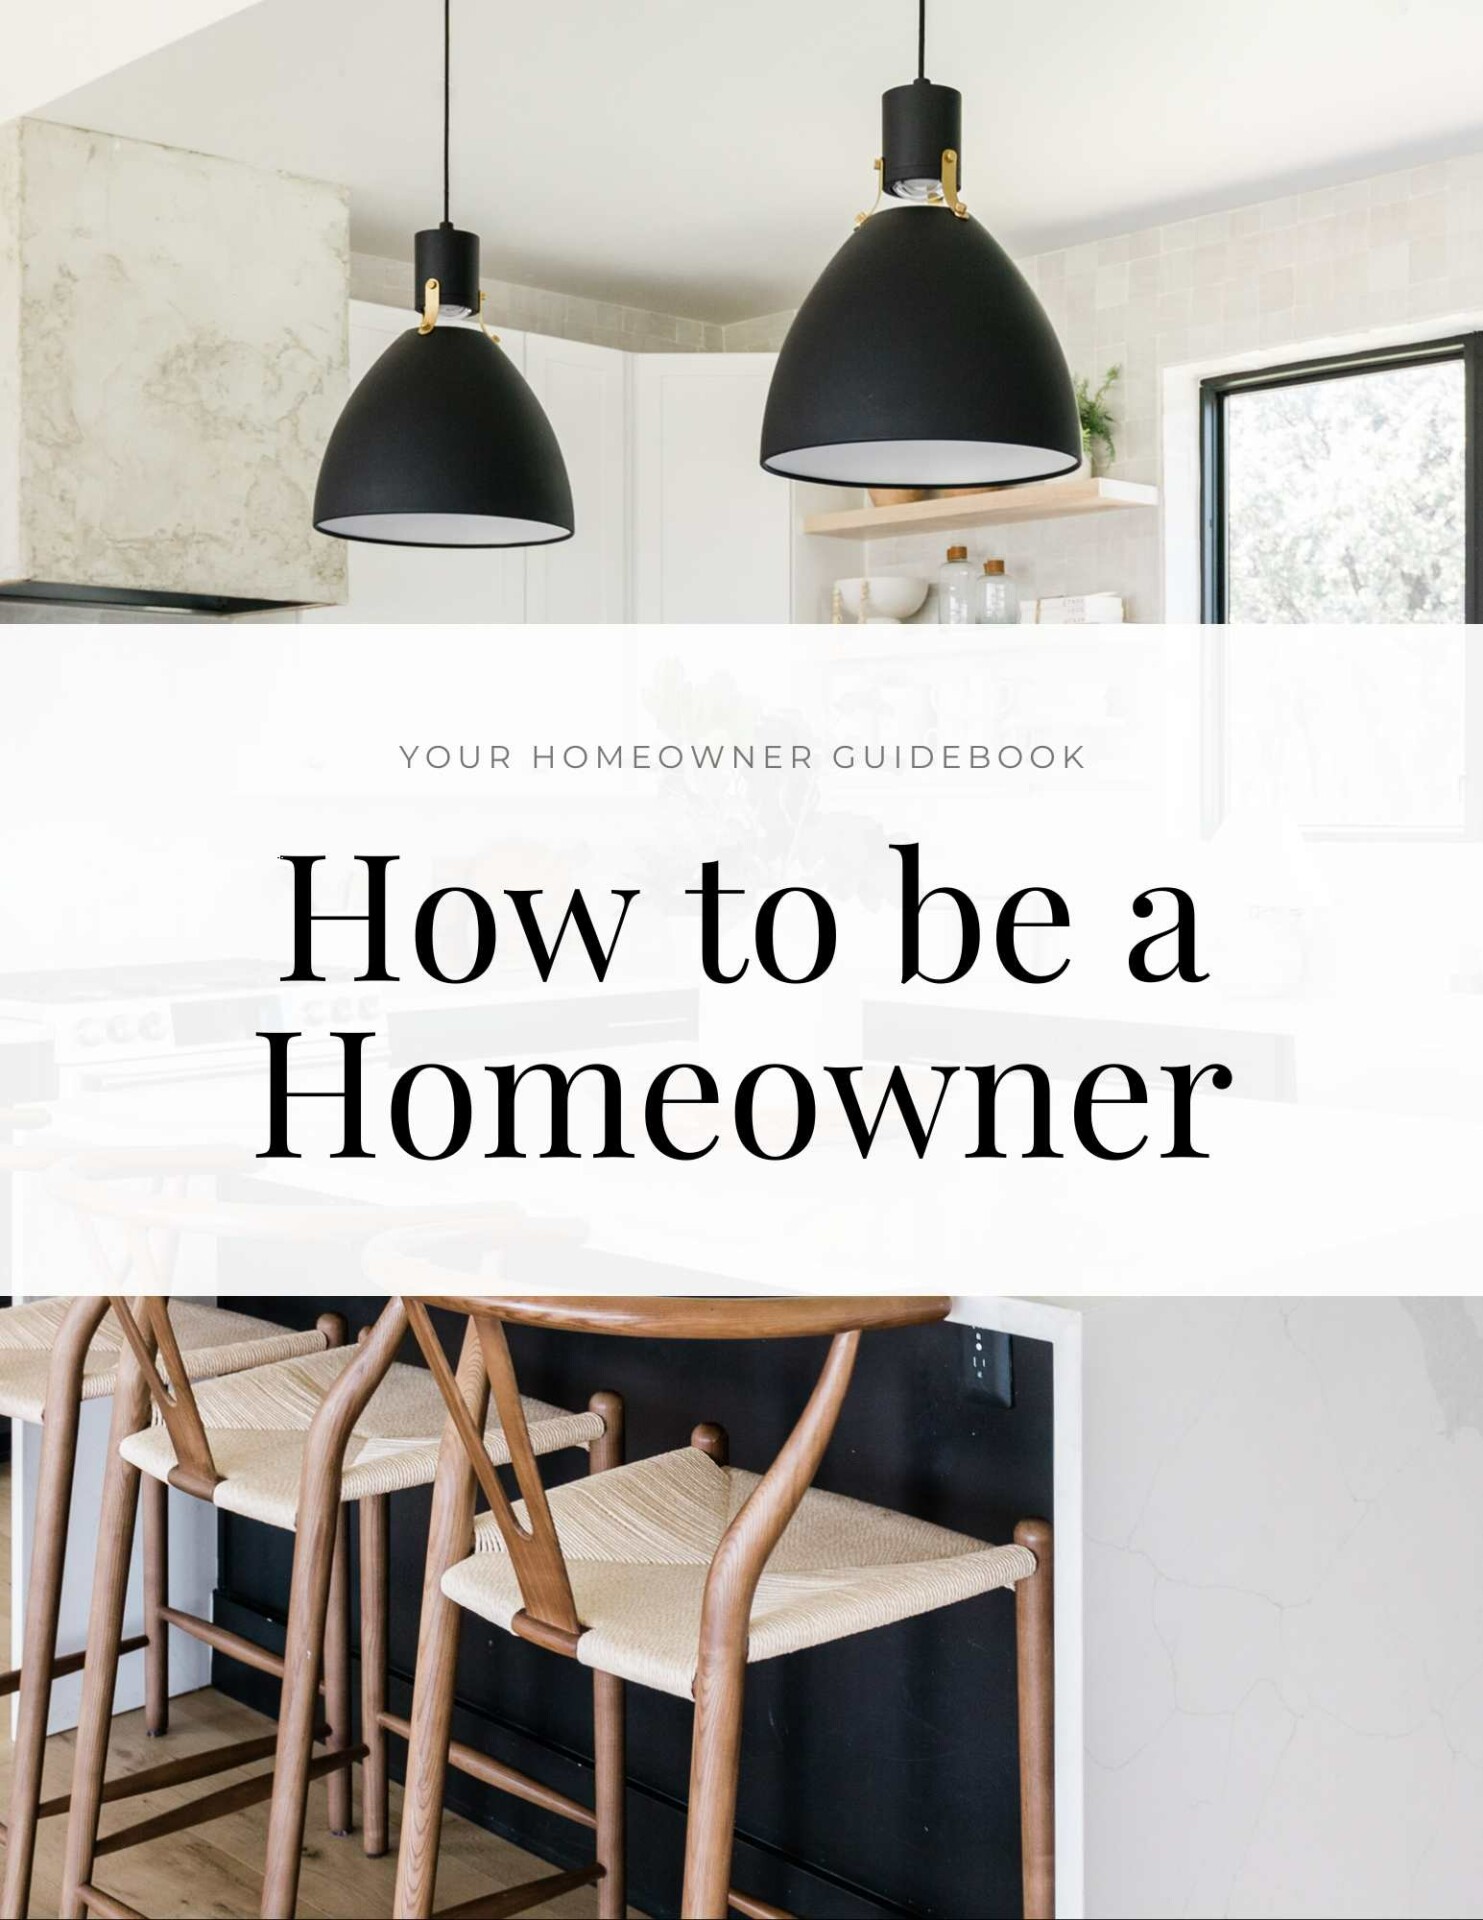 How to be a Homeowner Guide